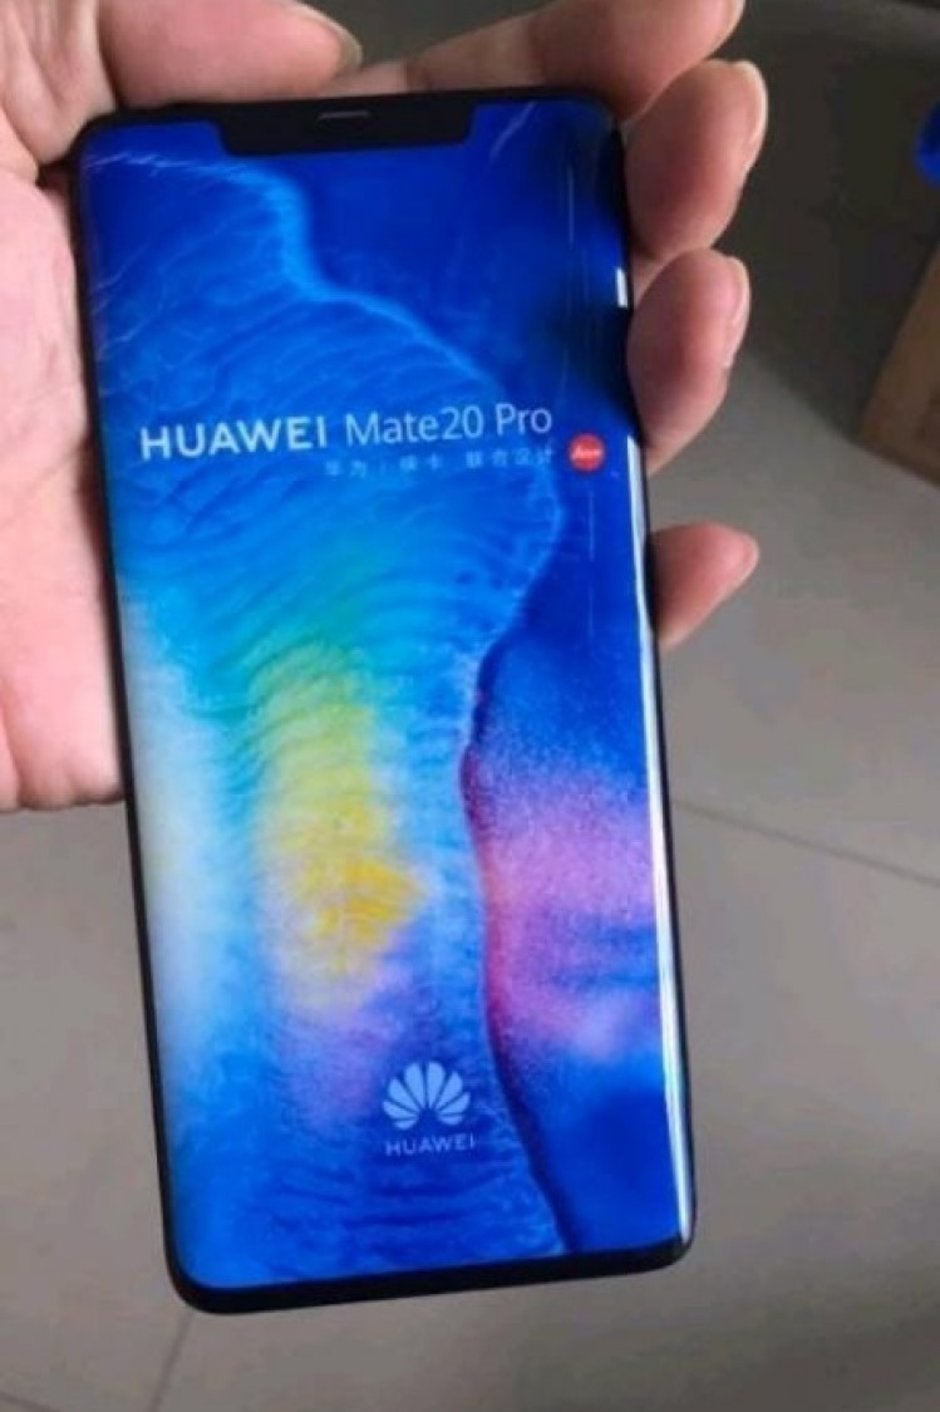 Huawei Mate 20 Pro dummy unit shows up with sleek design, very thin bezels